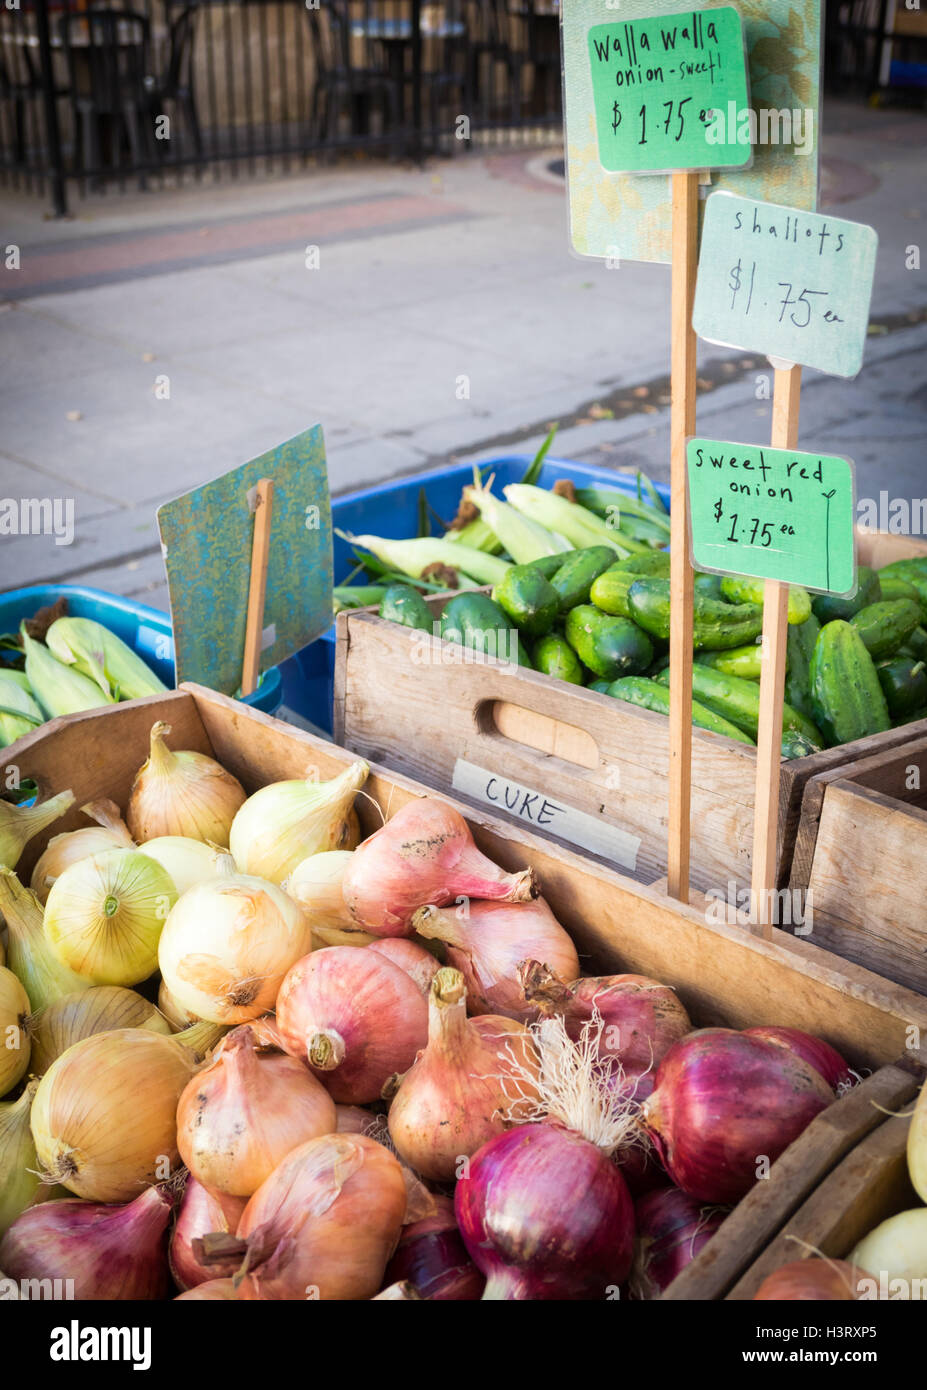 Walla Walla sweet onions (left), shallots (center), and sweet red onions (right) for sale at the City Market in Edmonton, Canada Stock Photo